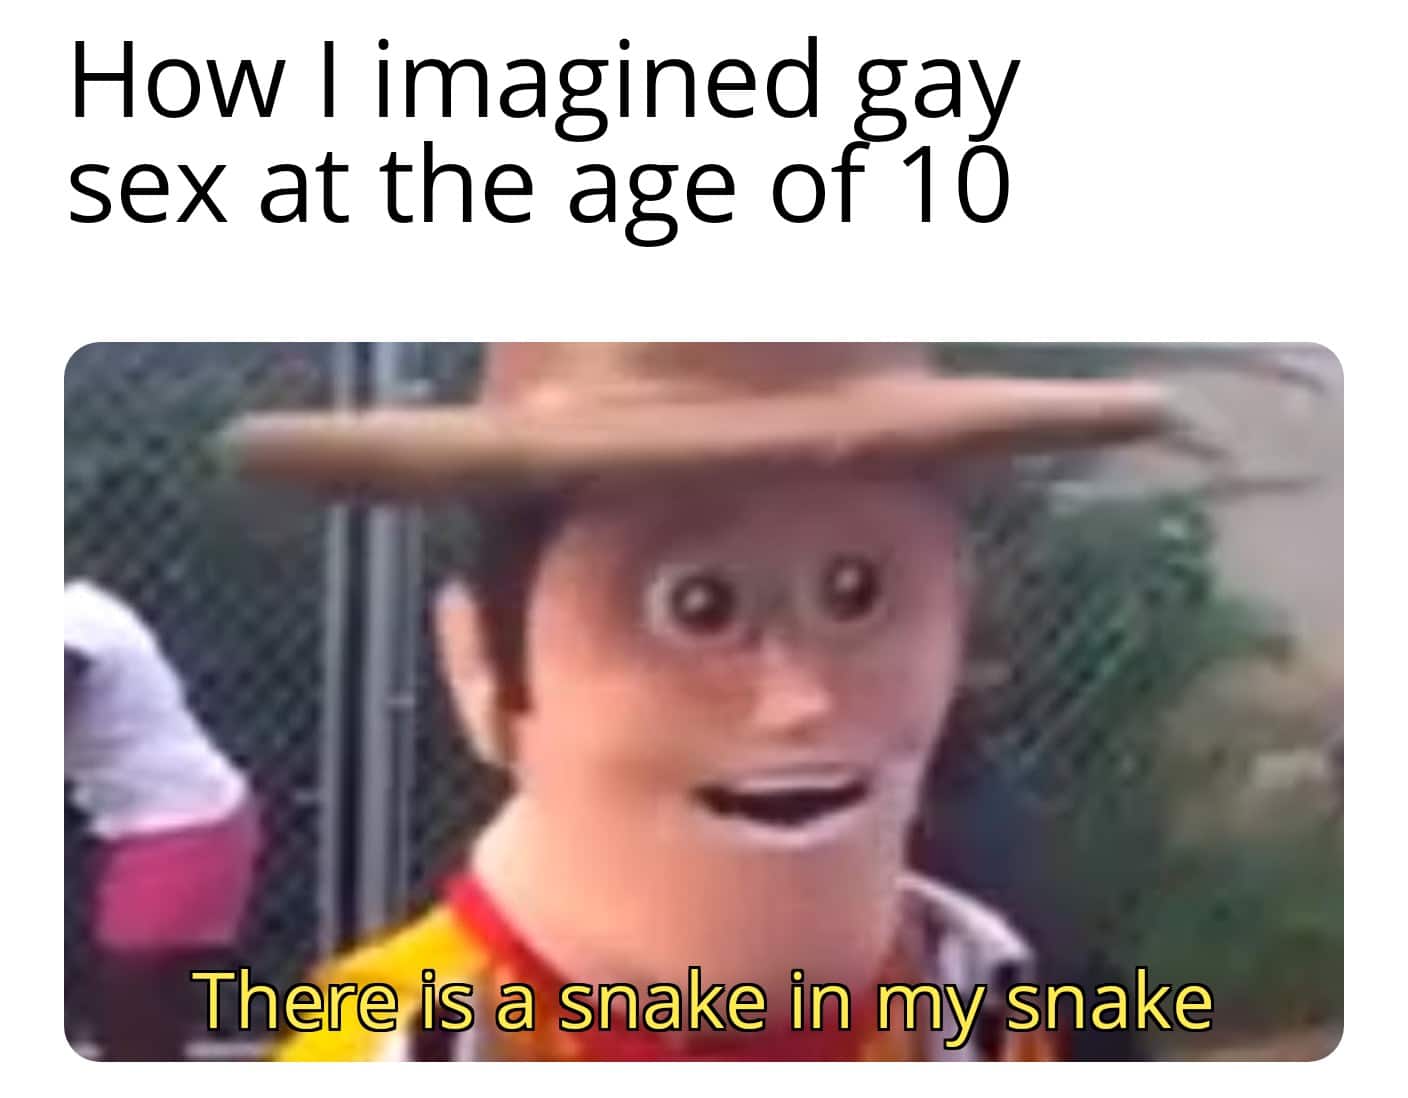 Dank, Visit, OC, Negative, JPEG, Feedback Dank Memes Dank, Visit, OC, Negative, JPEG, Feedback text: How I imagined gay sex at the age of 10 There is åénake in my .snake 